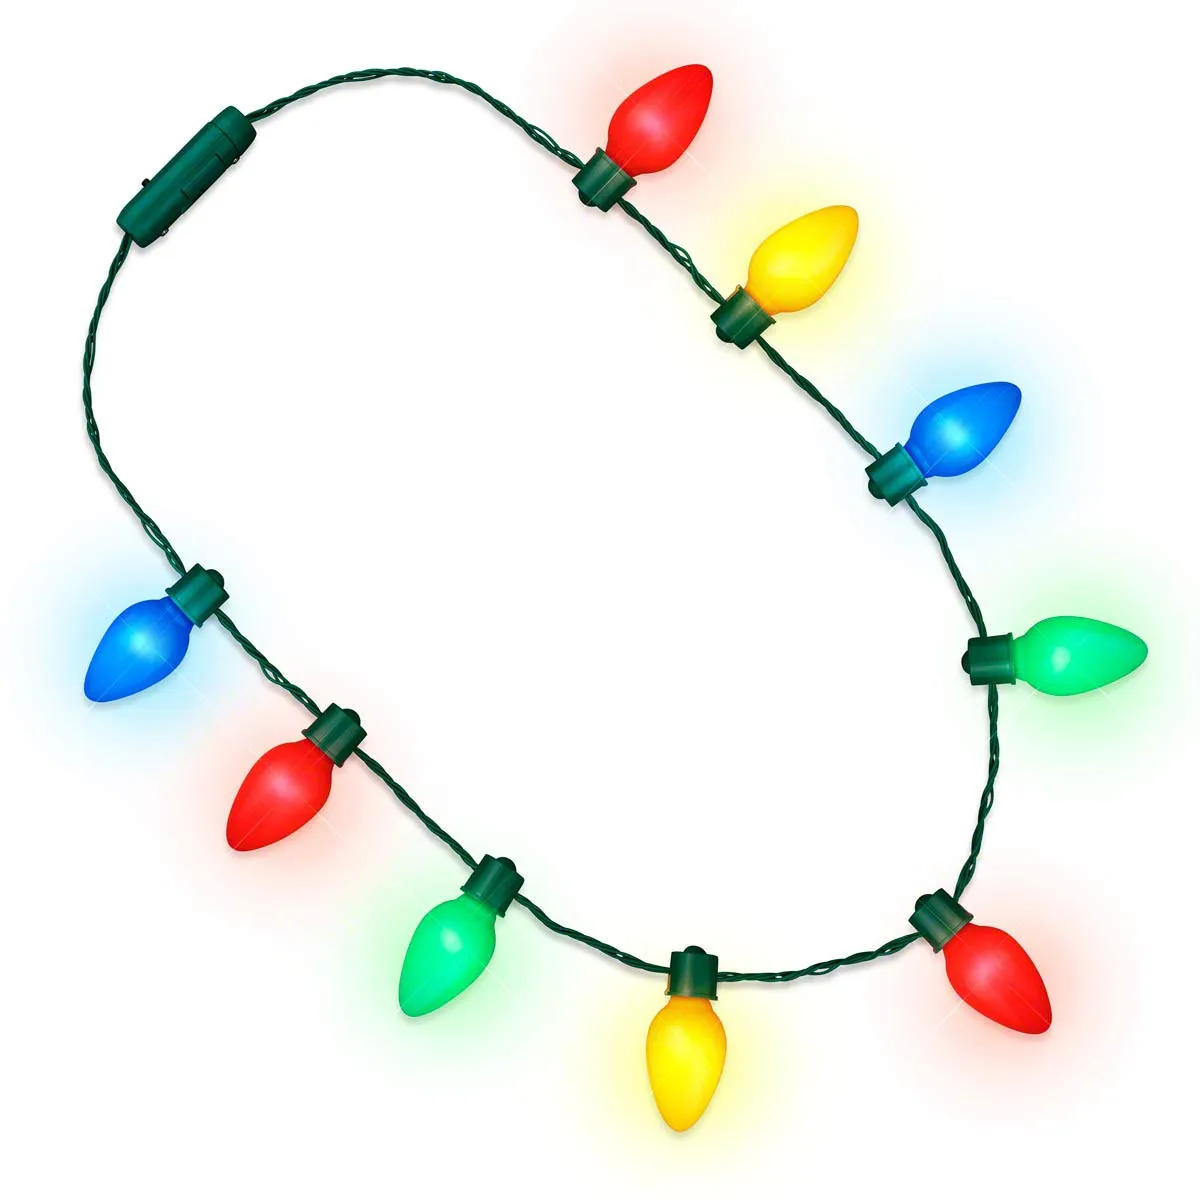 lightup jackolantern necklace with multimode flashing leds halloween party favors halloween party accessories for women men and kids great gift idea stocking stuffer